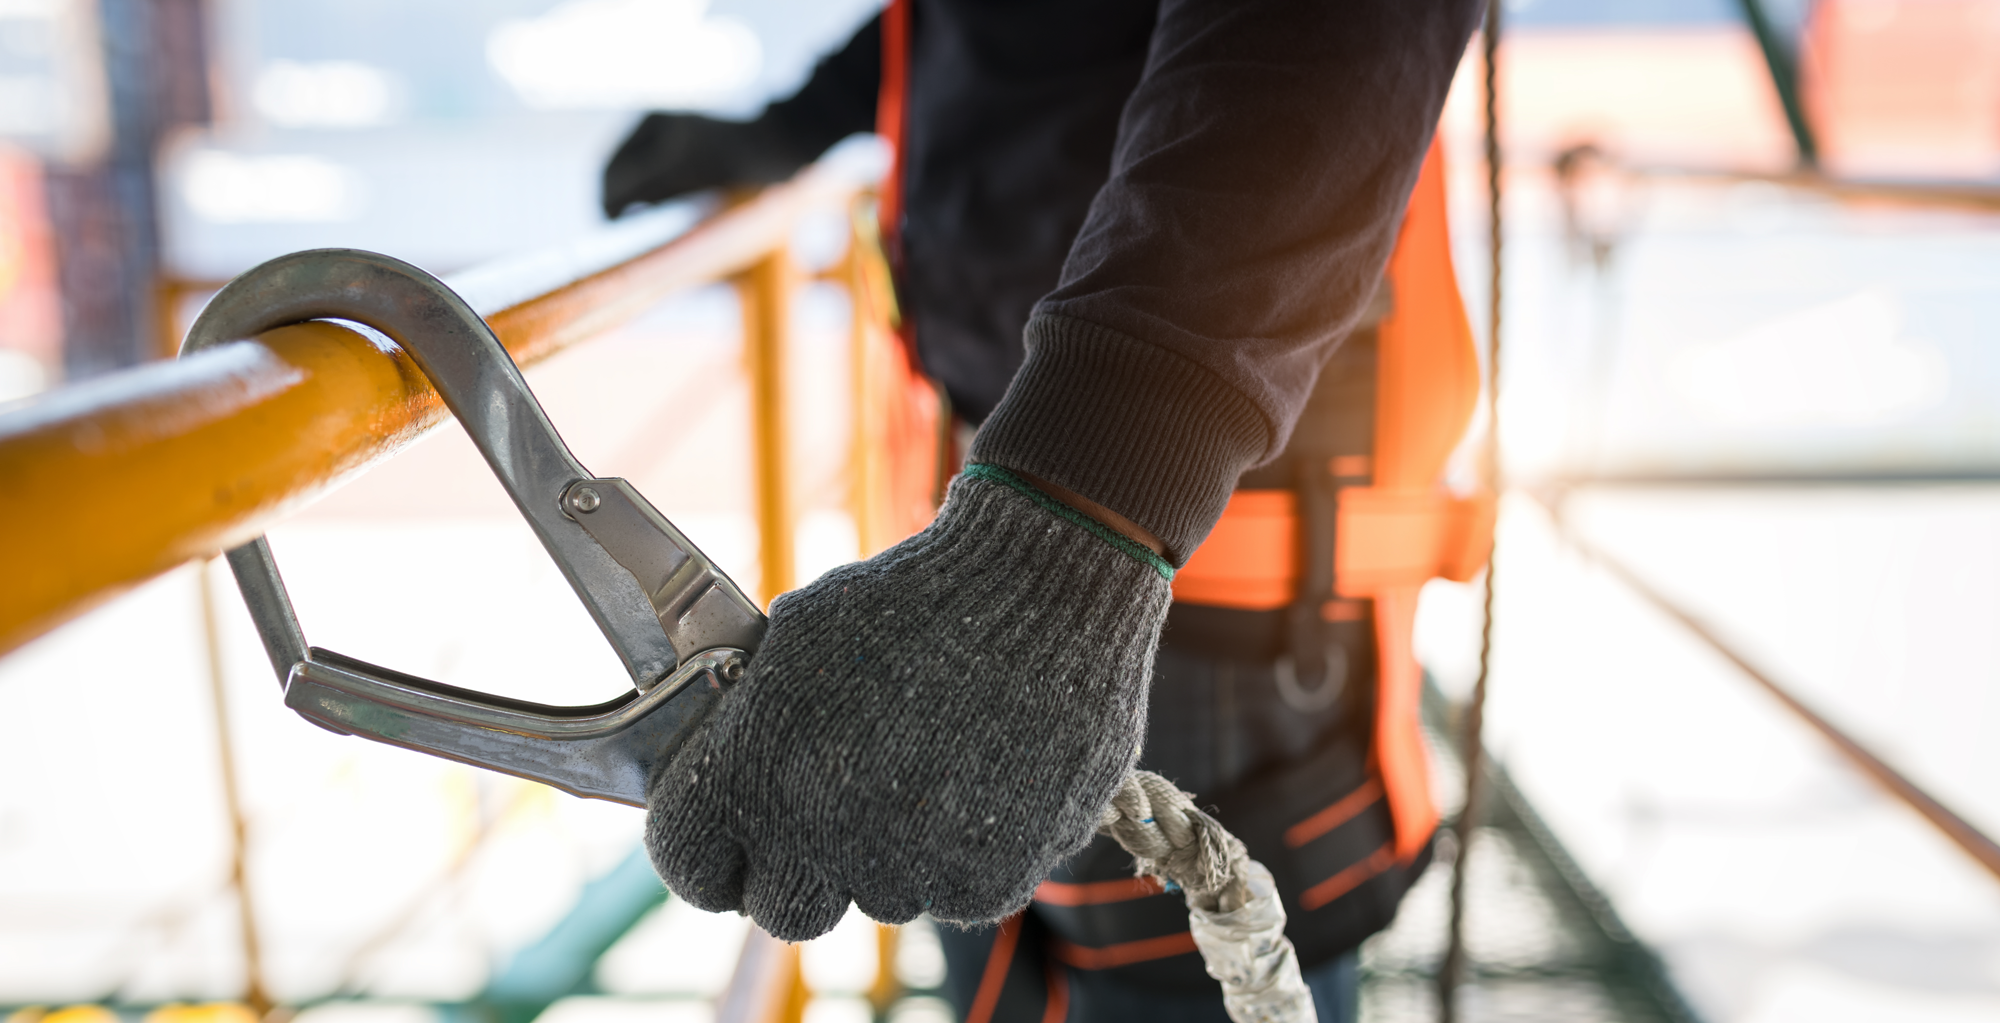 Handling Health and Safety Hazards on a Construction Site